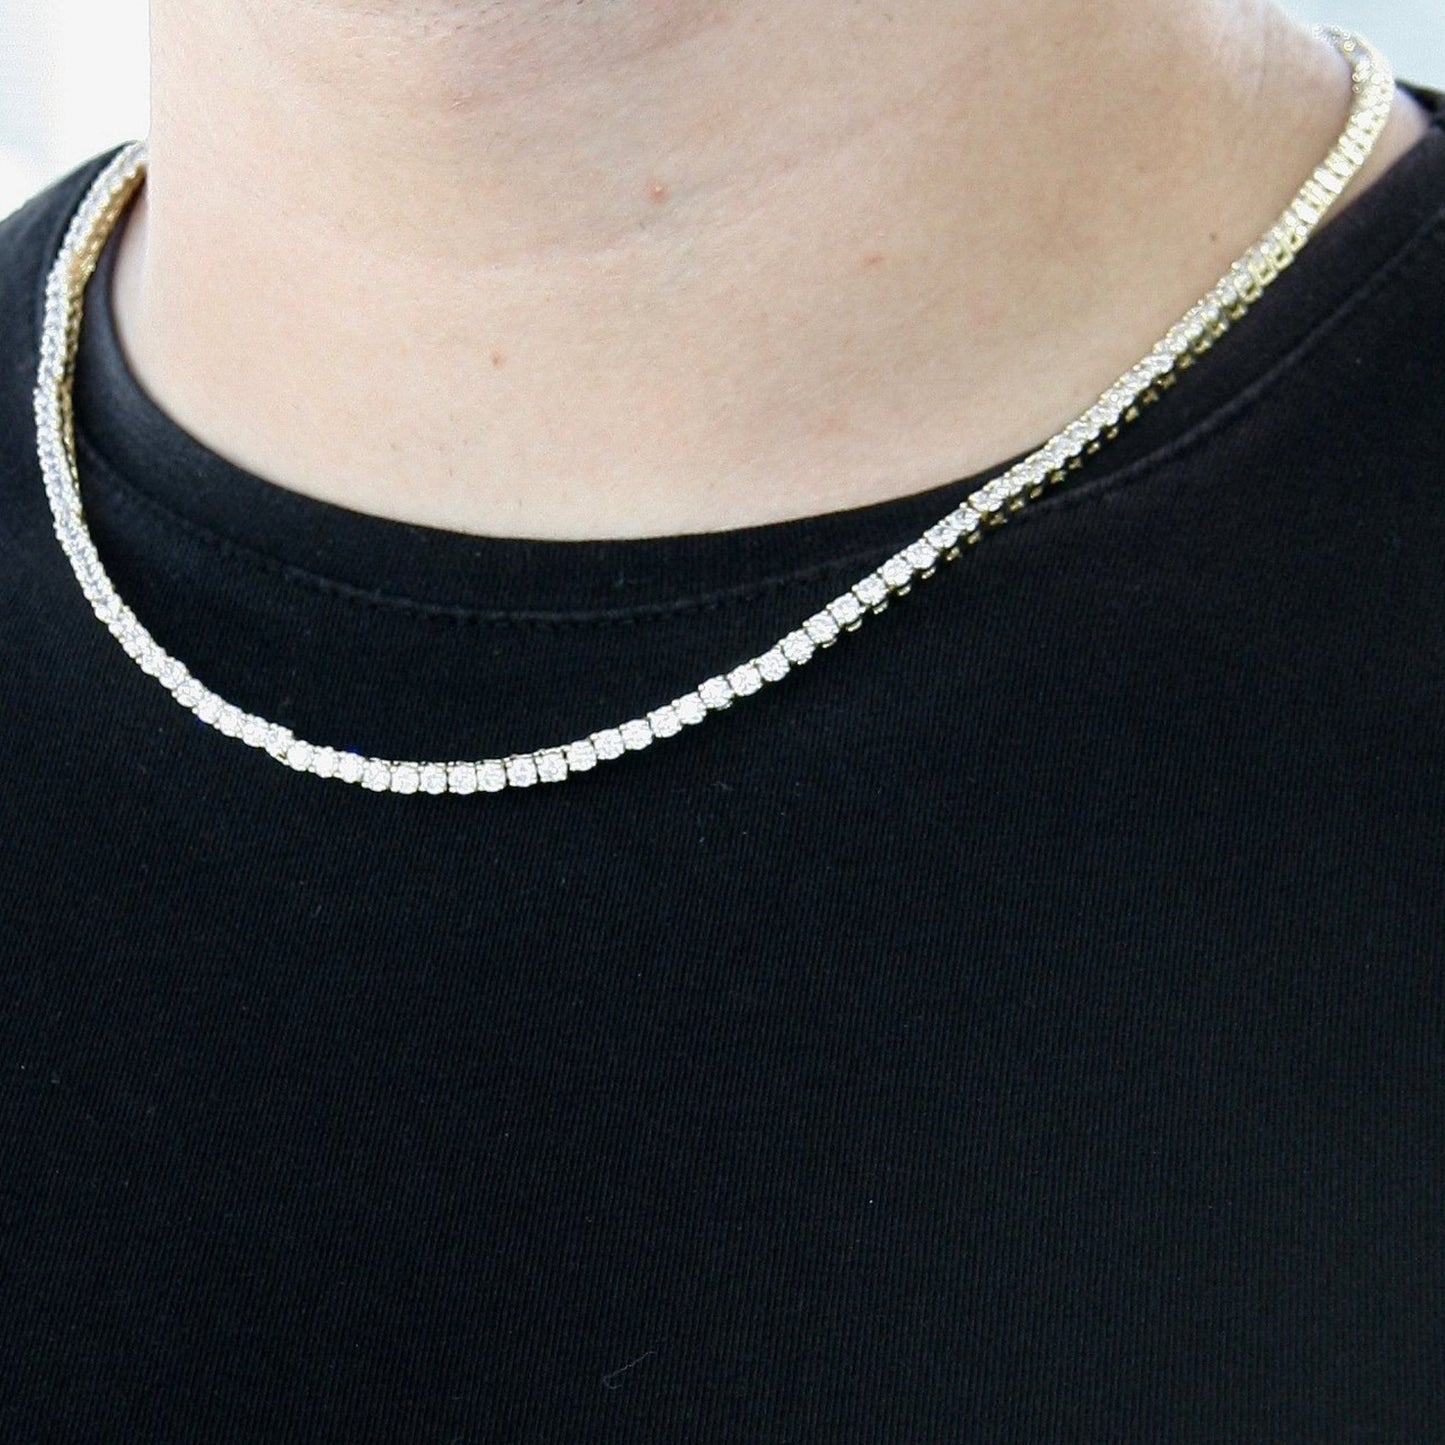 3MM GOLD PLATED TENNIS CHAIN